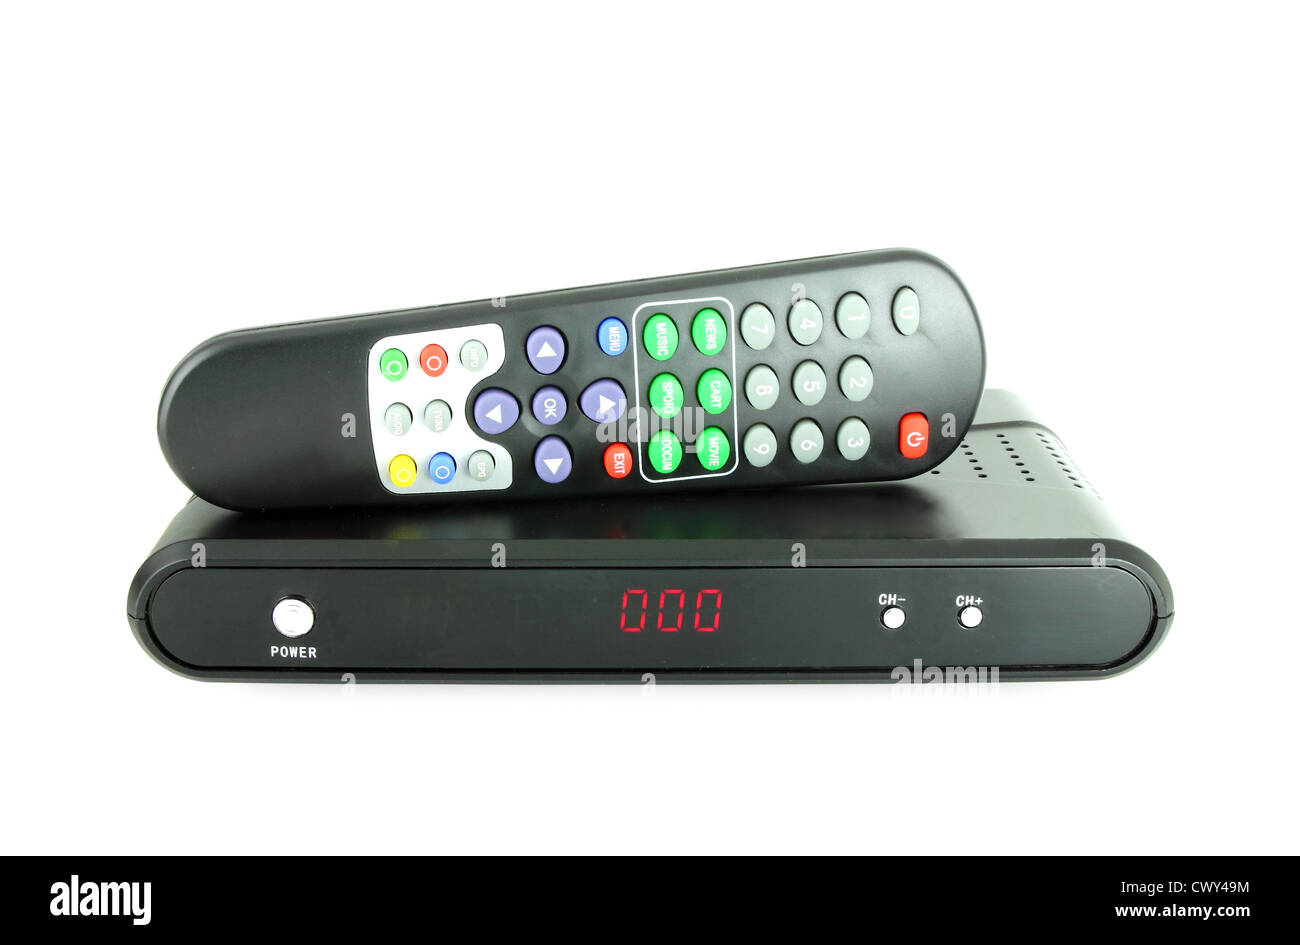 remote and receiver for satellite TV on white Stock Photo